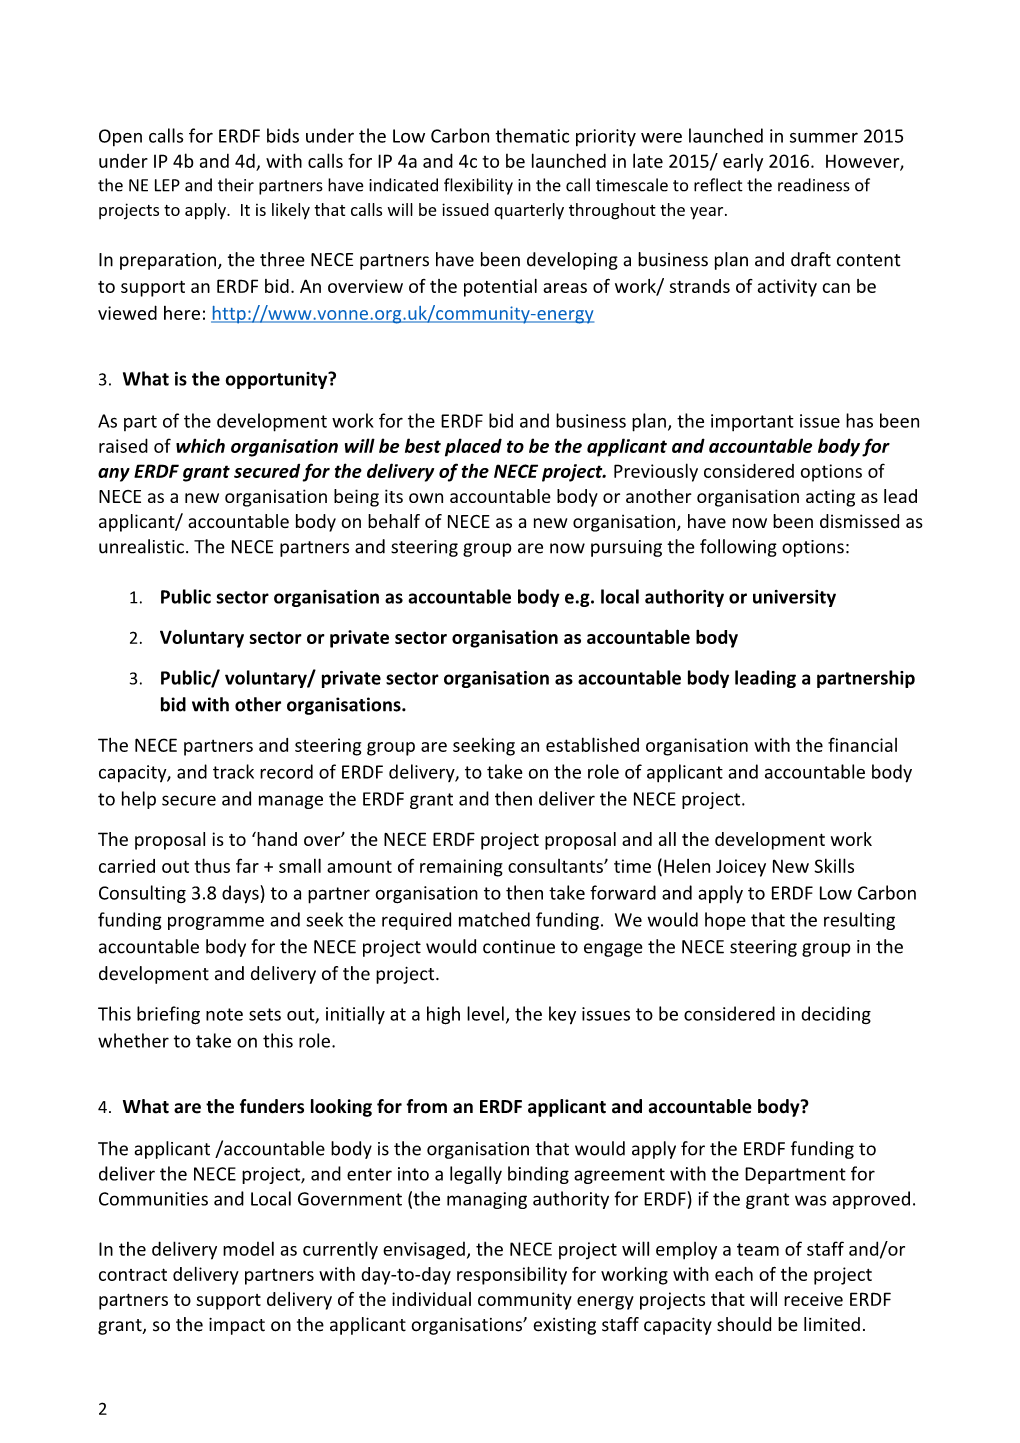 Briefing Note Re. North East Community Energy Accountable Body